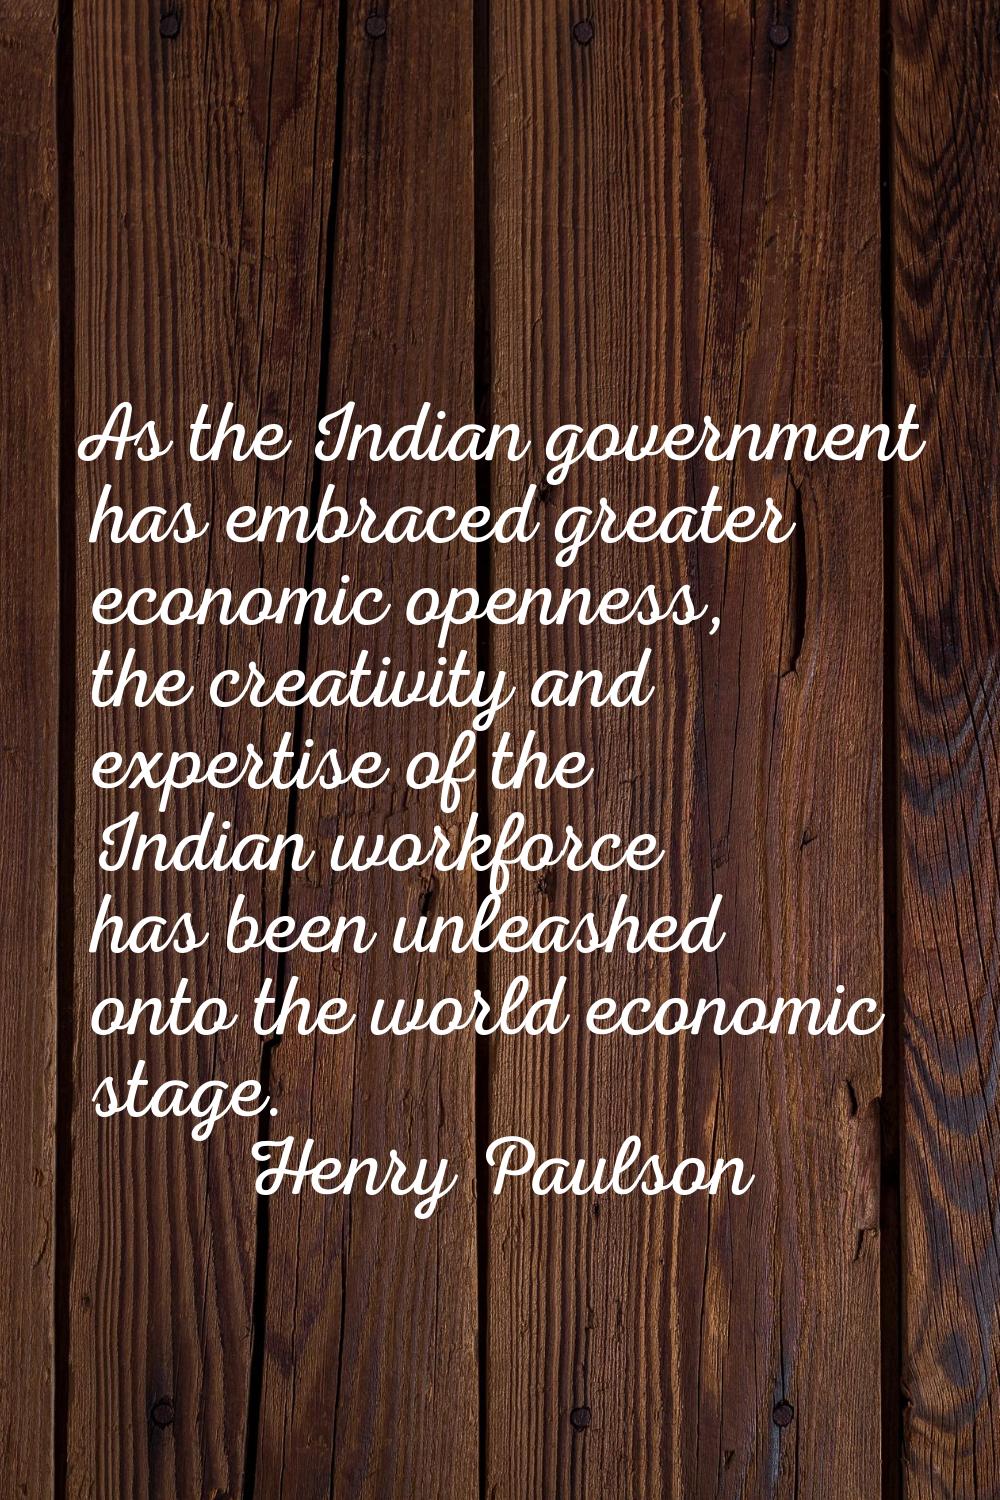 As the Indian government has embraced greater economic openness, the creativity and expertise of th